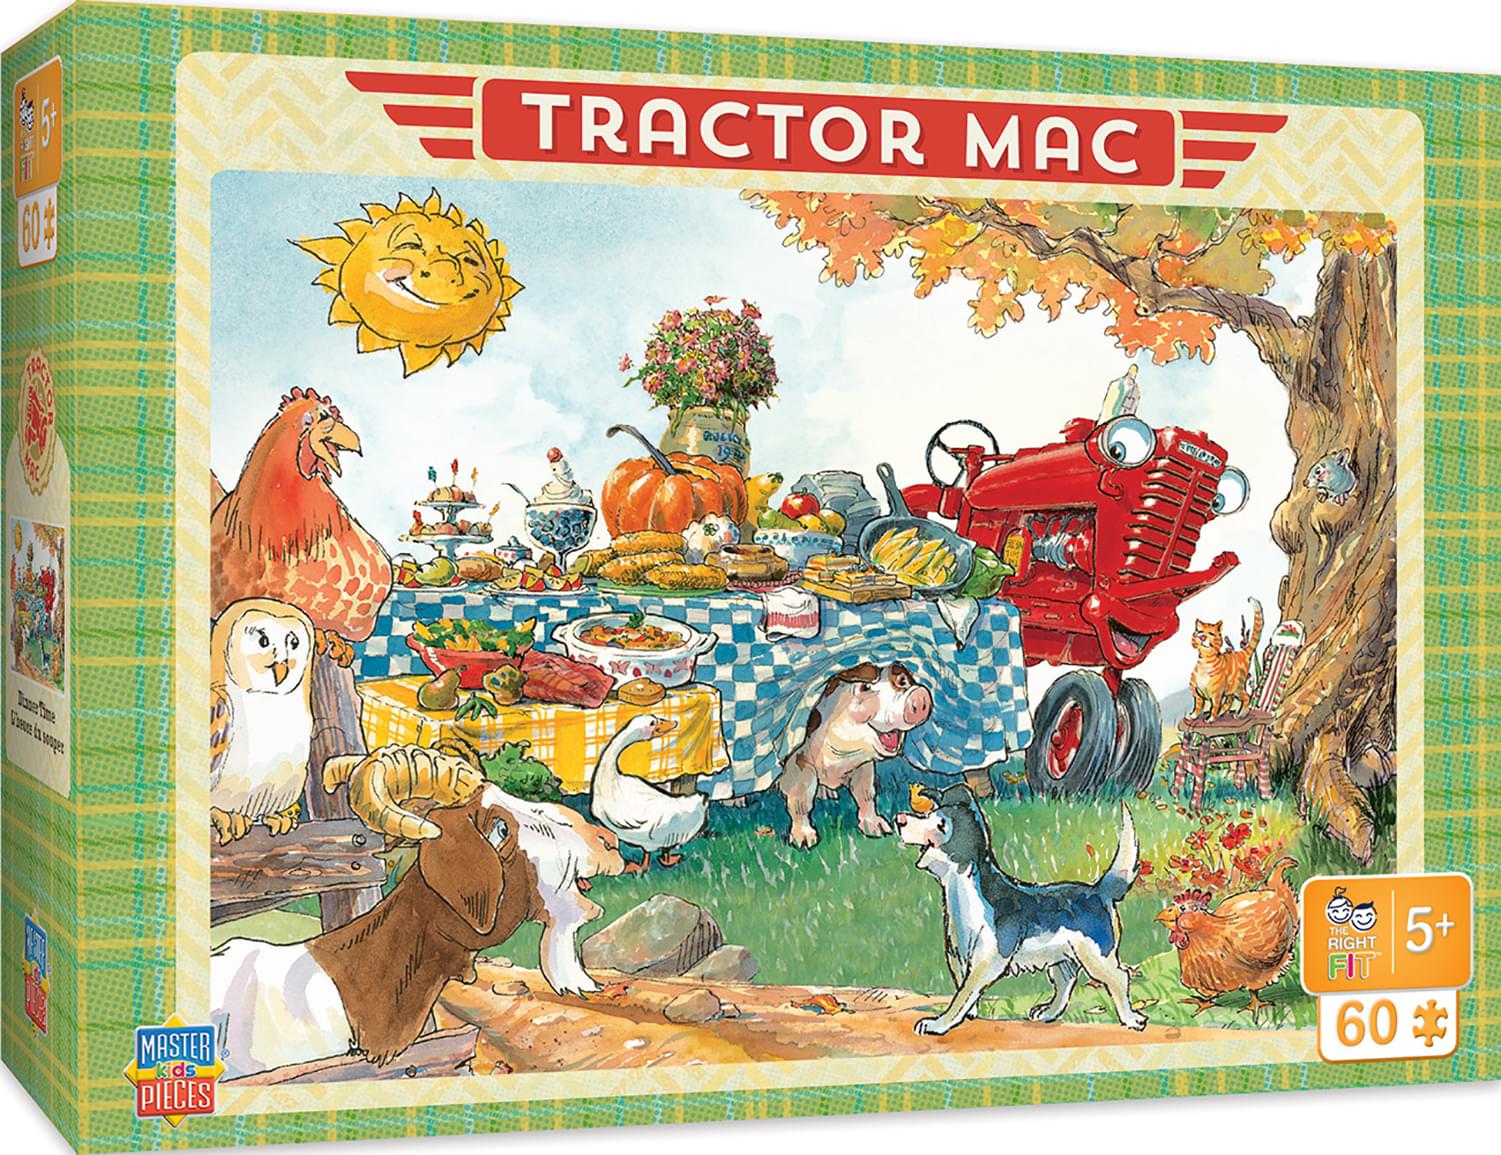 Tractor Mac Dinner Time 60 Piece Jigsaw Puzzle